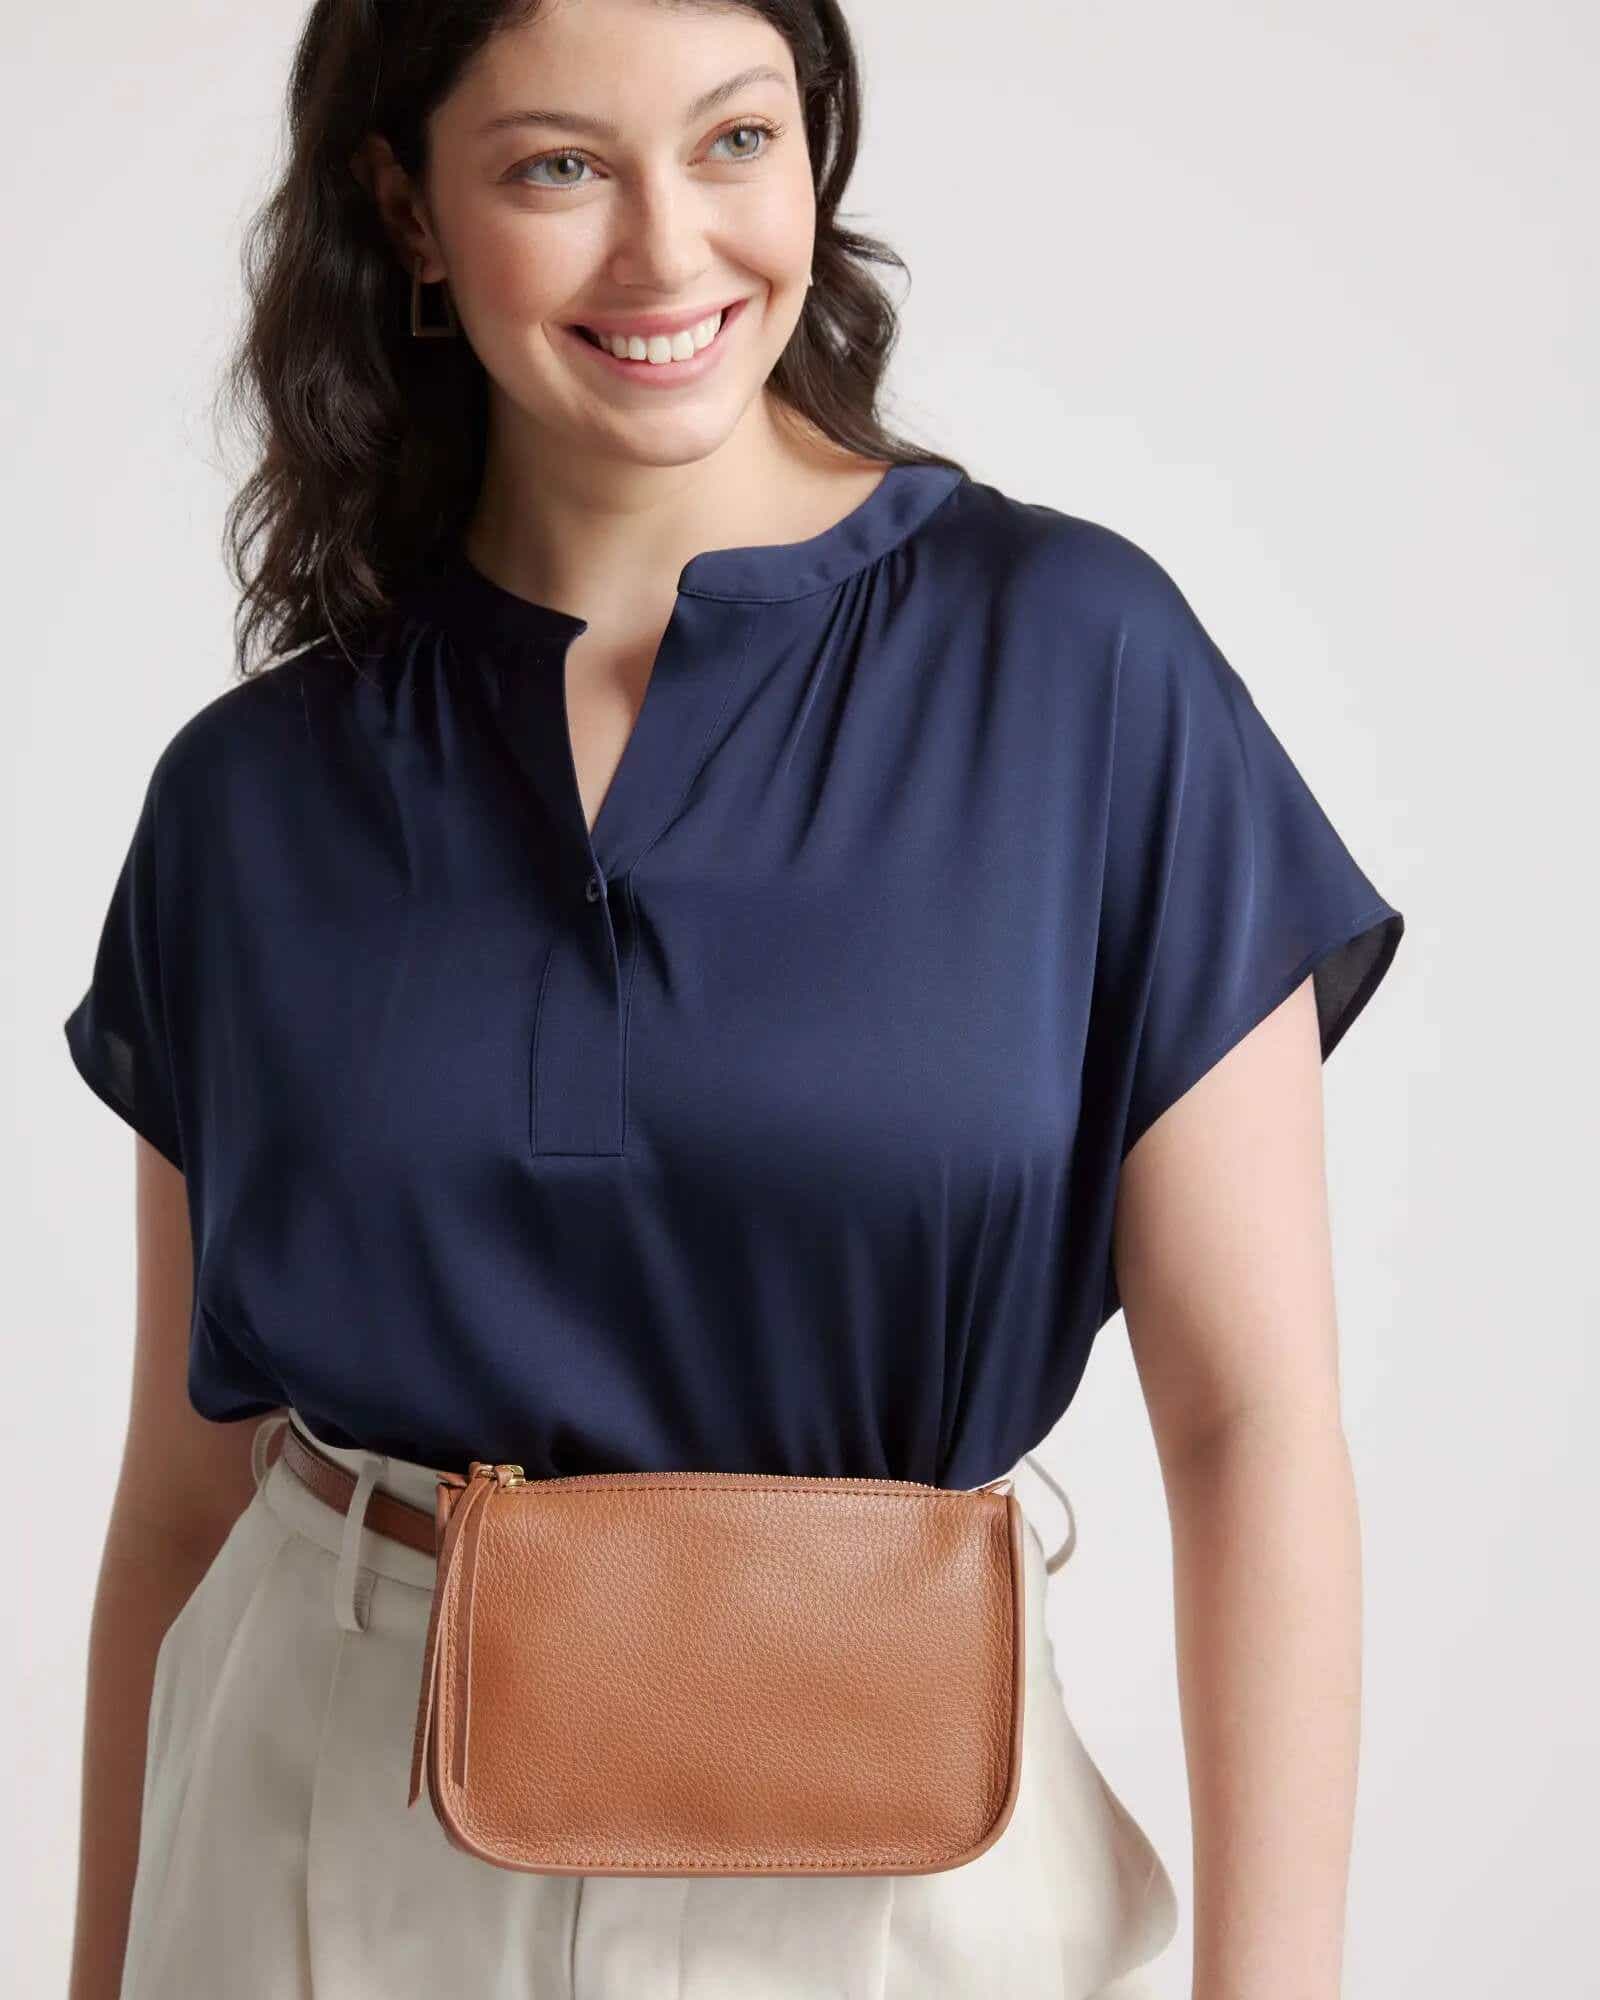 12 Best Belt Bags and Fanny Packs for Women 2023